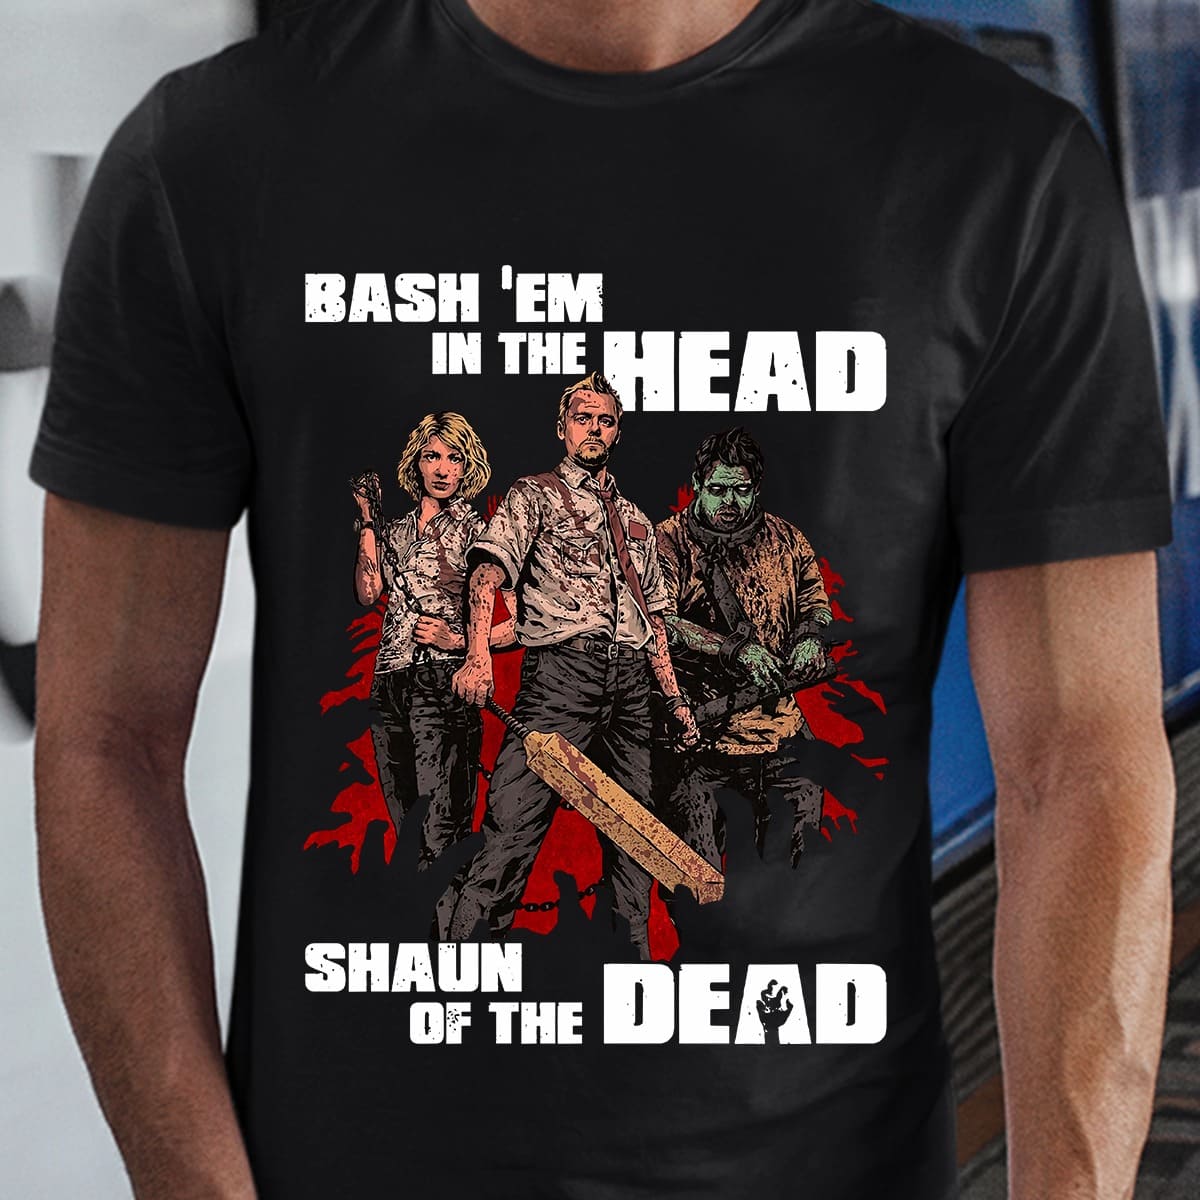 Bash em in the head, shaun of the dead - Zombie movie for Halloween